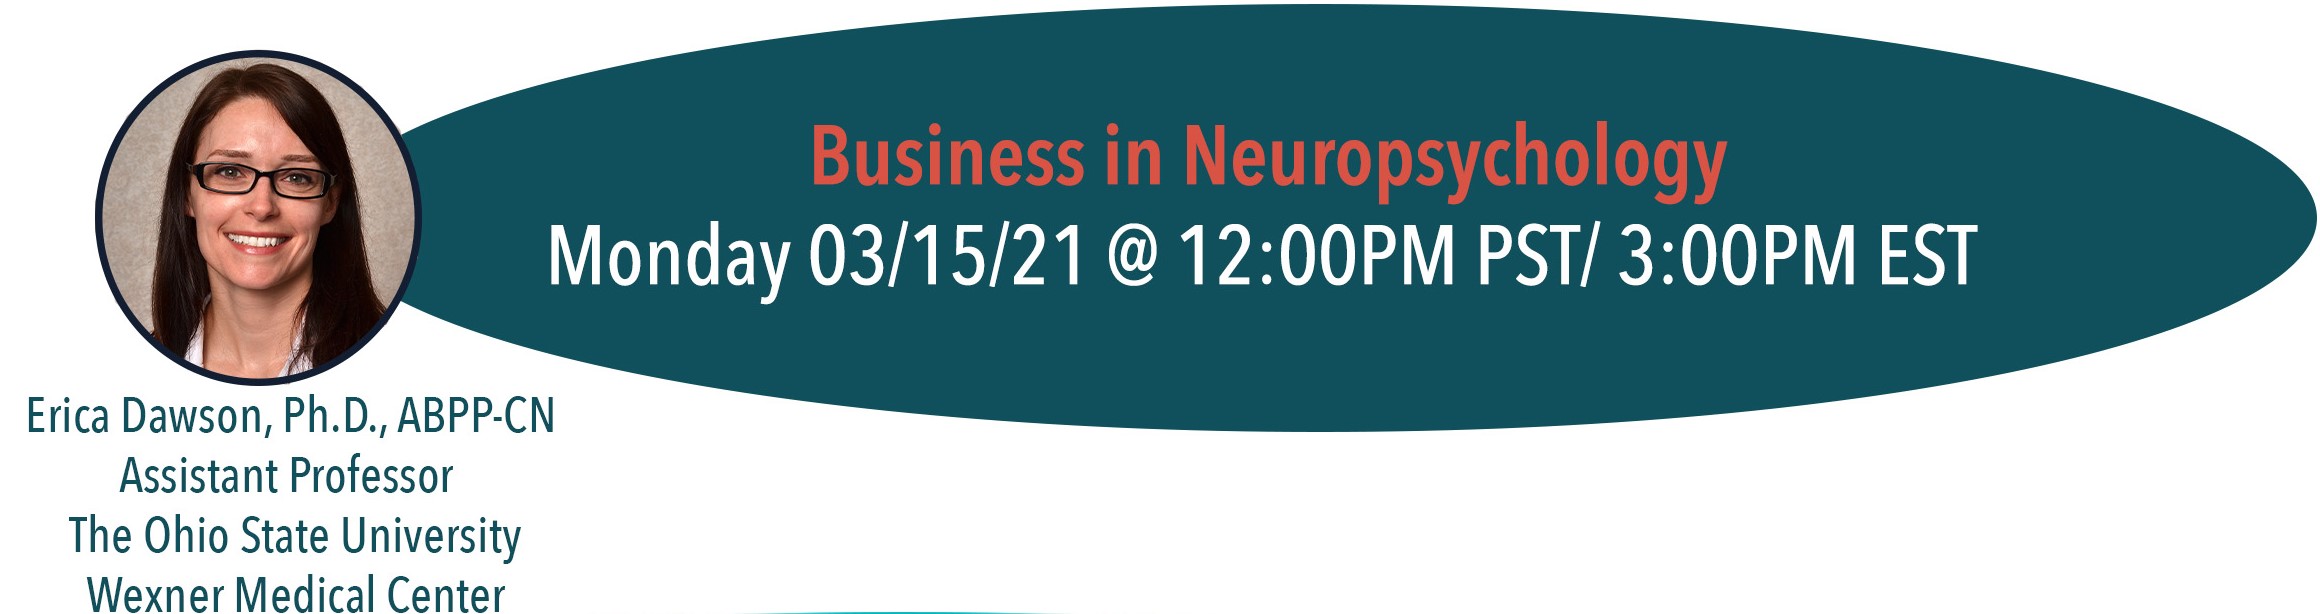 Business in Neuropsychology with Dr. Erica Dawson